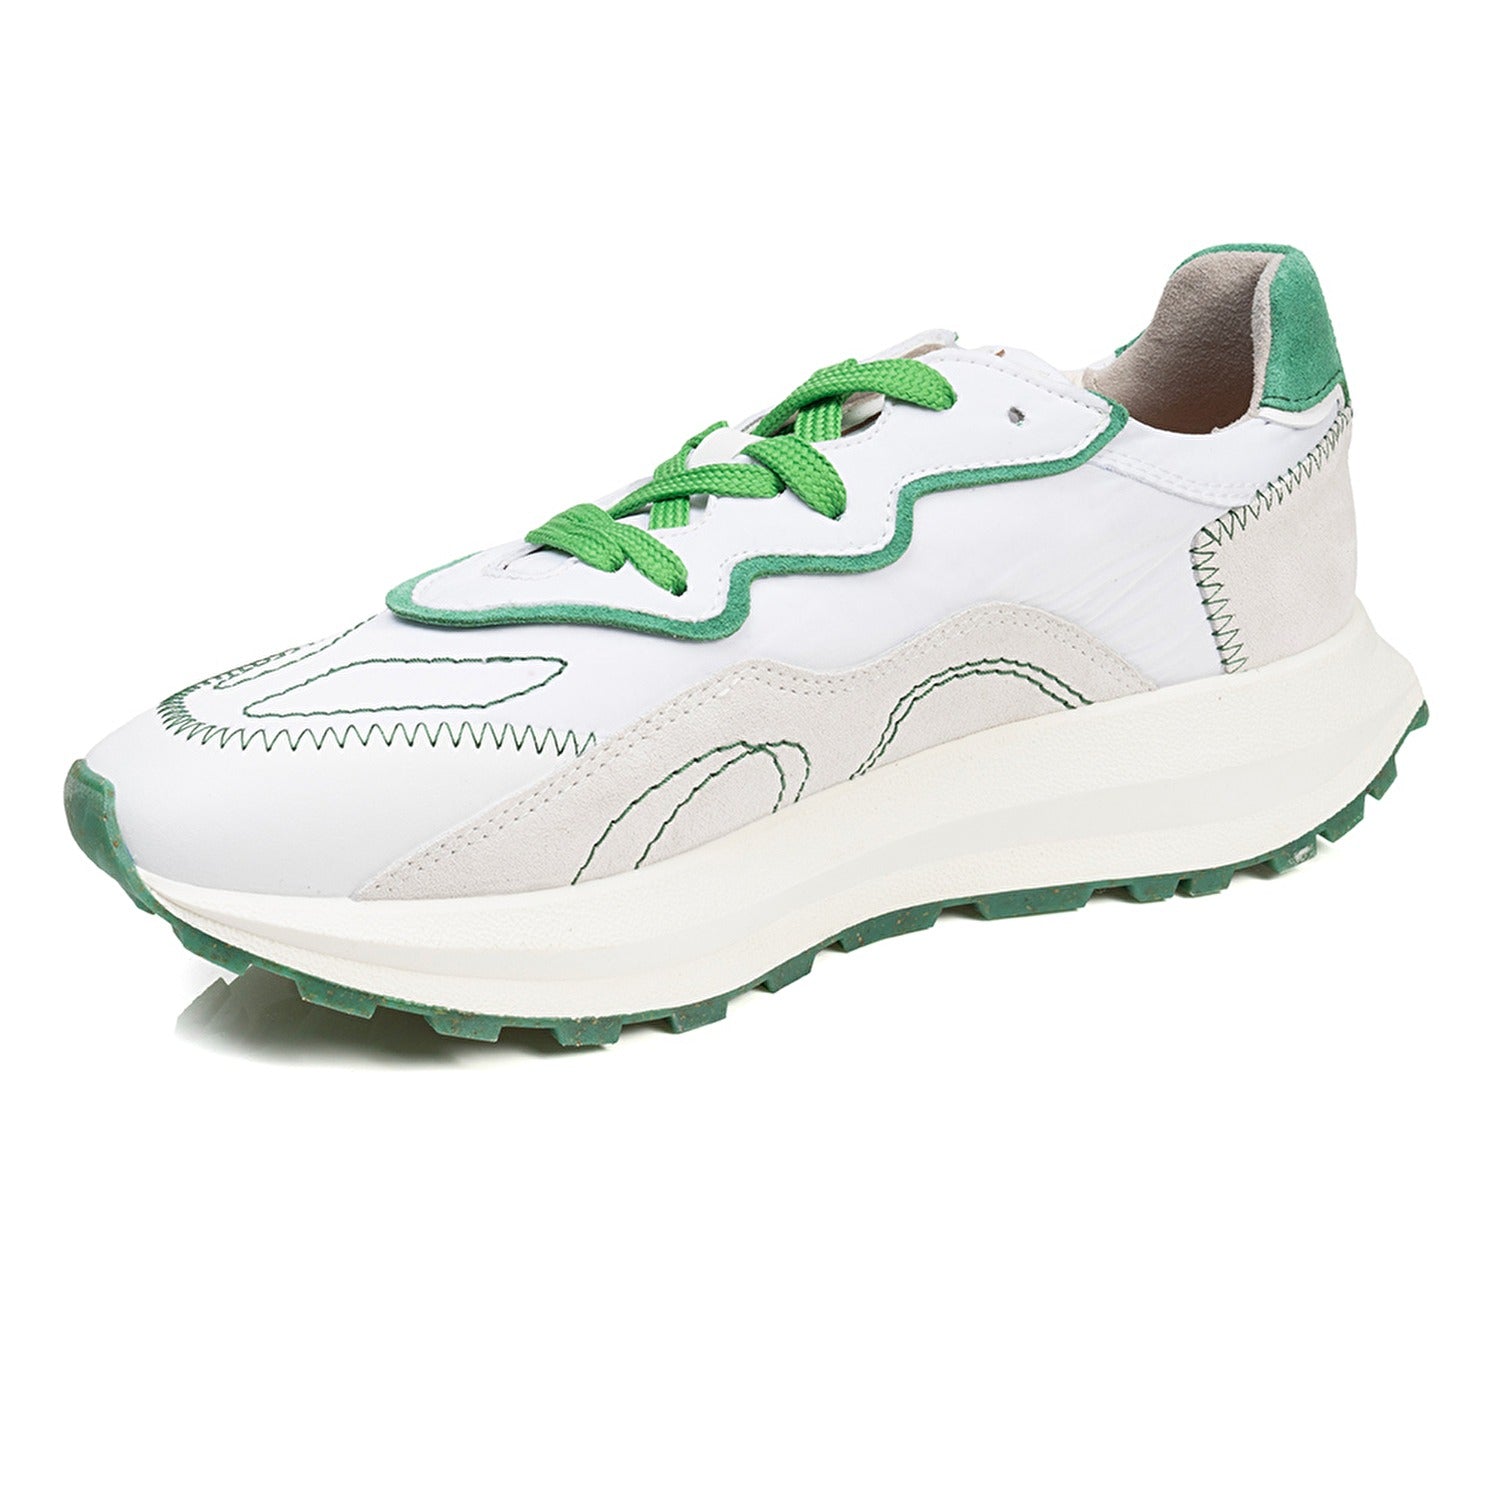 ClassicStride Genuine Leather Sports Sneakers 3Y1SA20040 White Green